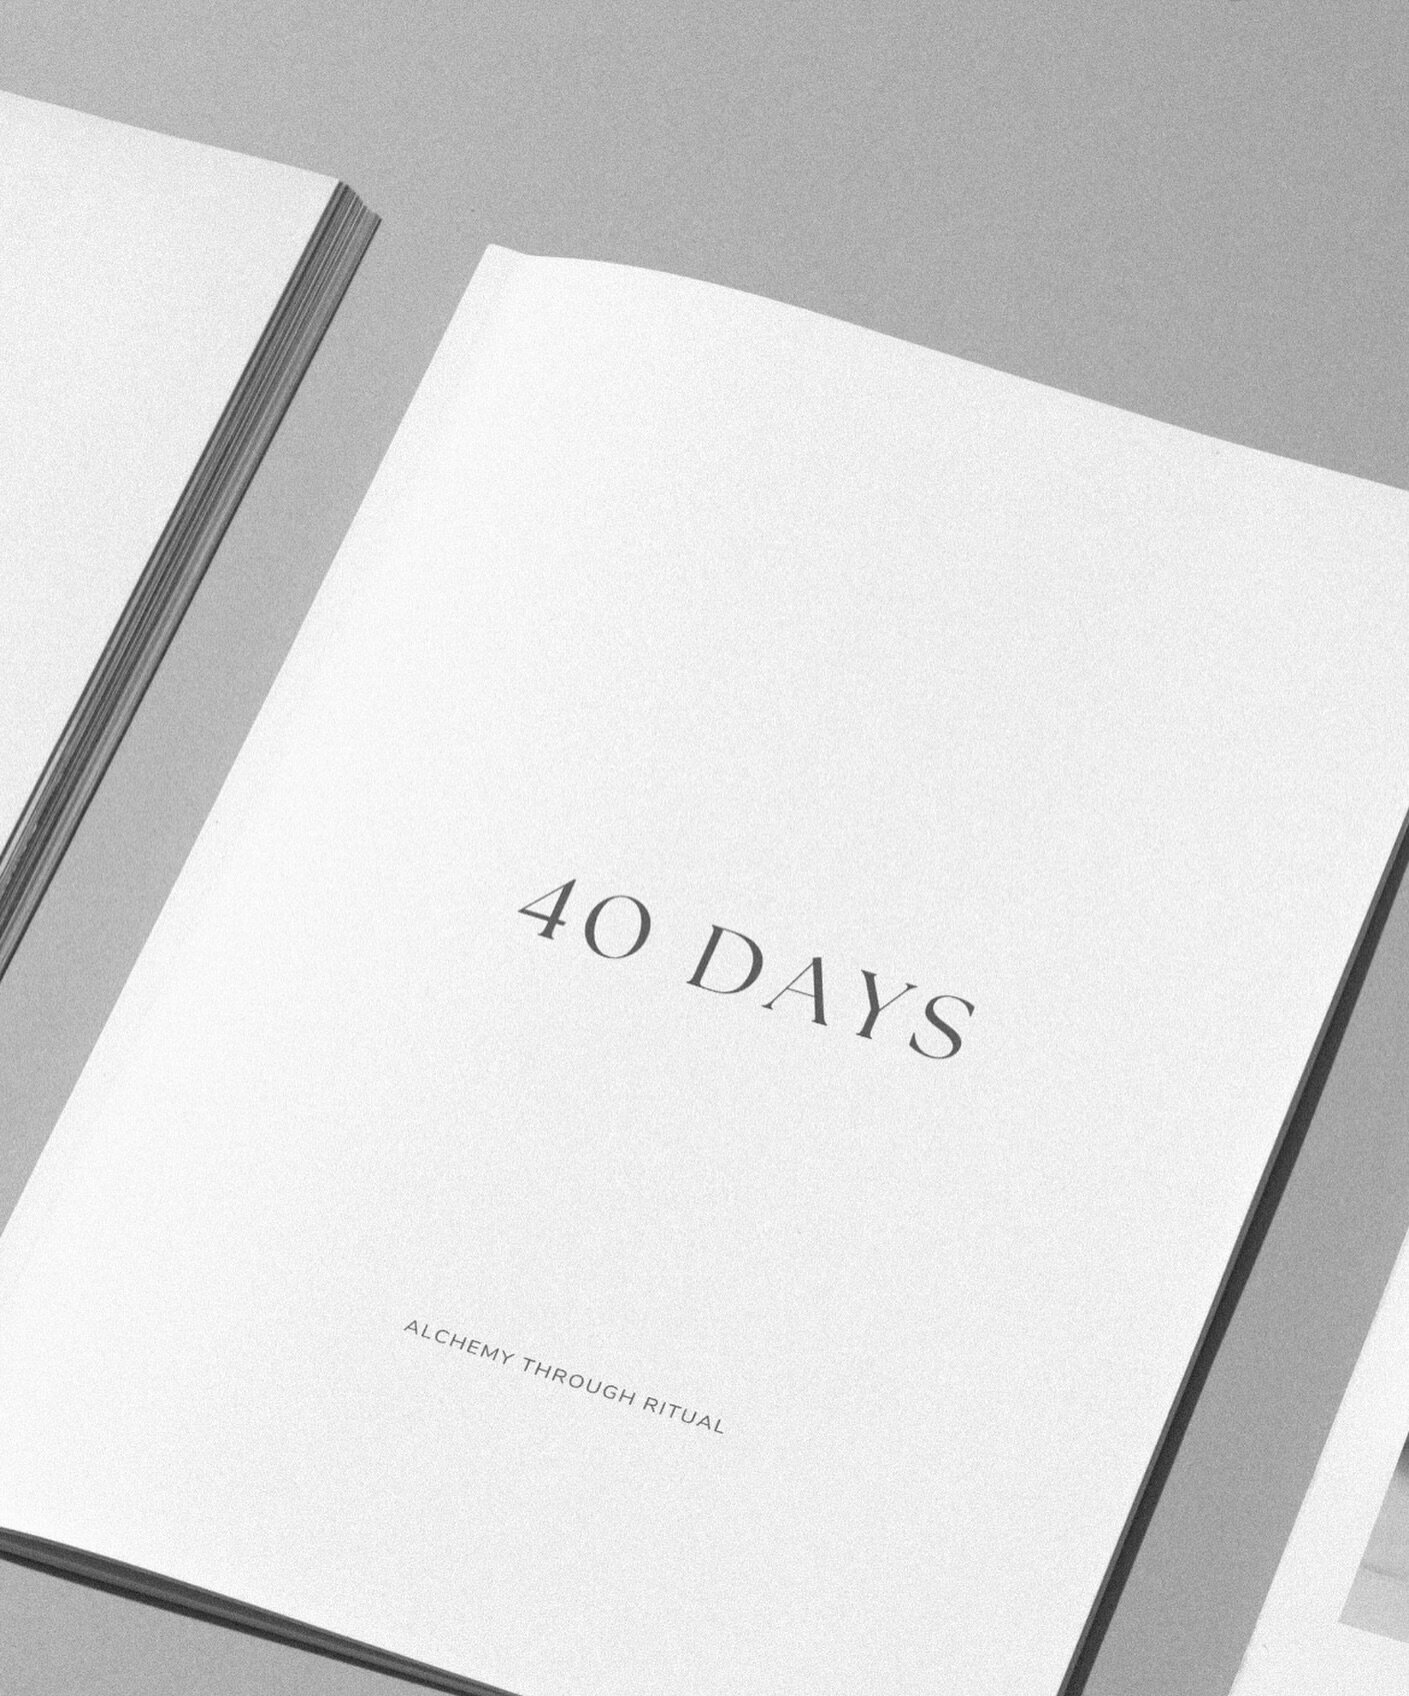 40 Days - combining the power of vision building, meditation &amp; neuroscience &mdash; Coming soon 

#40days